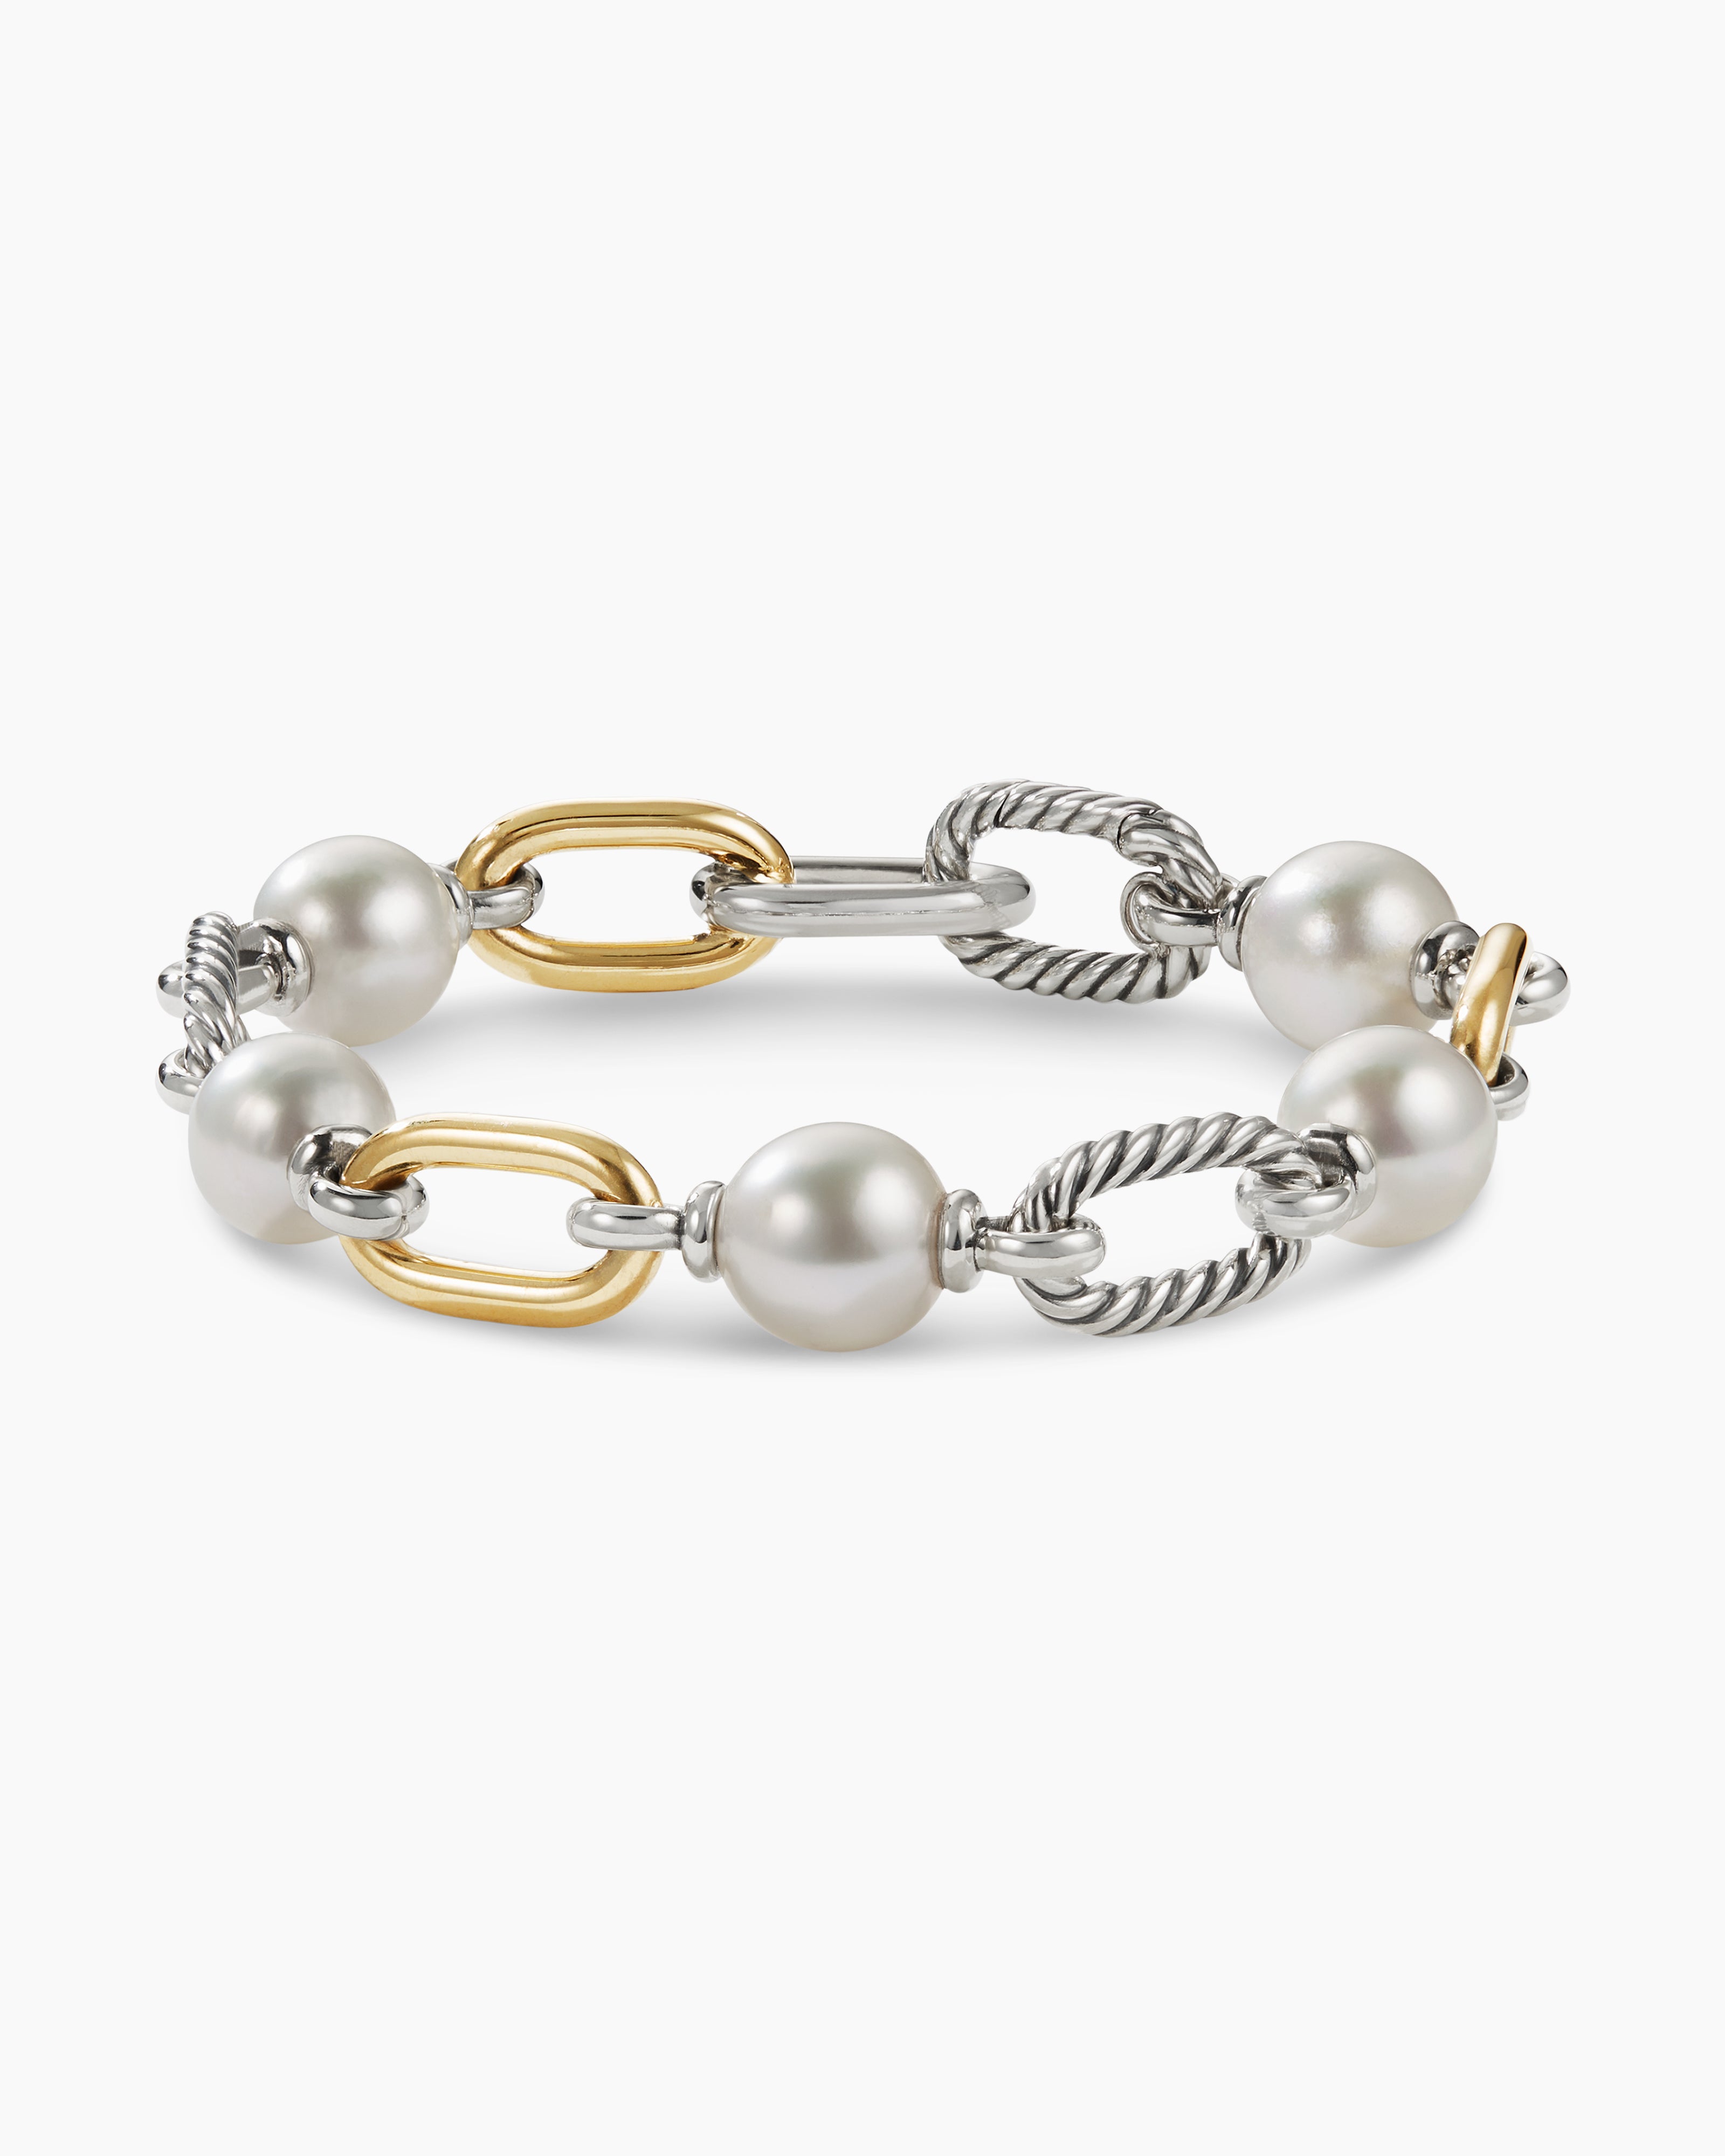 DY Madison Pearl Chain Bracelet in Sterling Silver with 18K Yellow Gold,  11mm | David Yurman